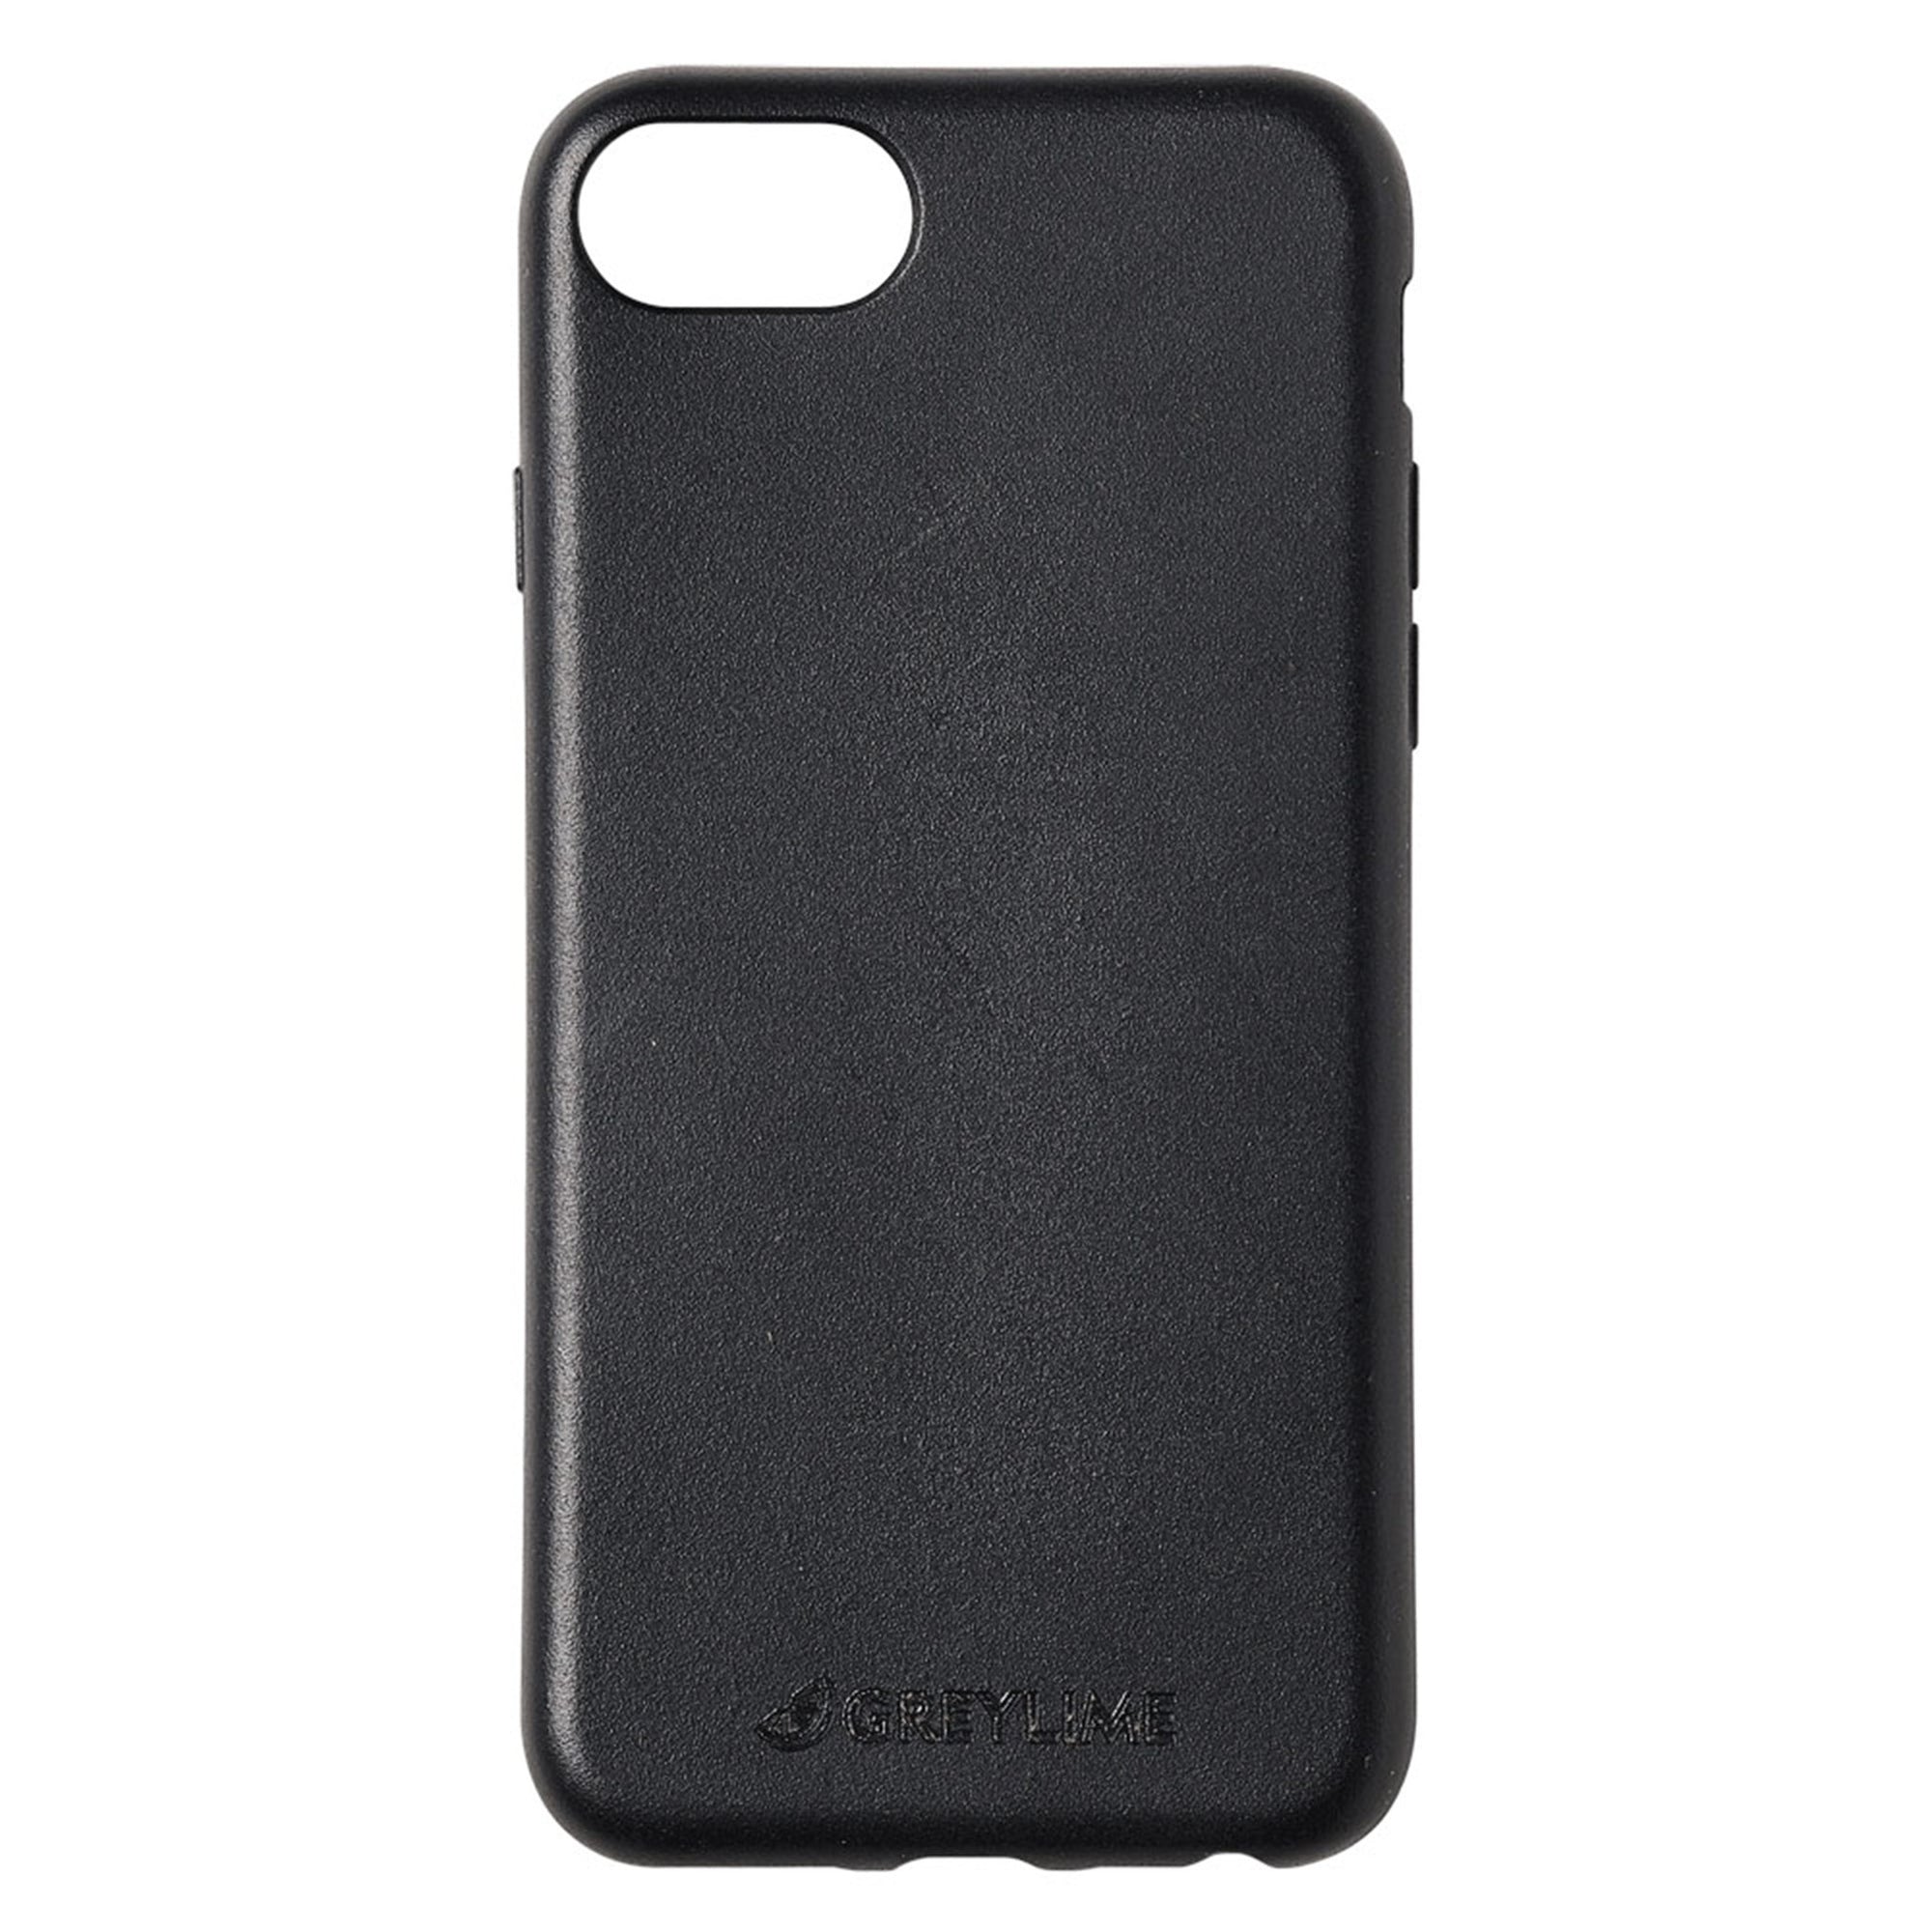 GreyLime-iPhone-6-7-8-Plus-biodegradable-cover-Black-COIP678P01-V4.jpg